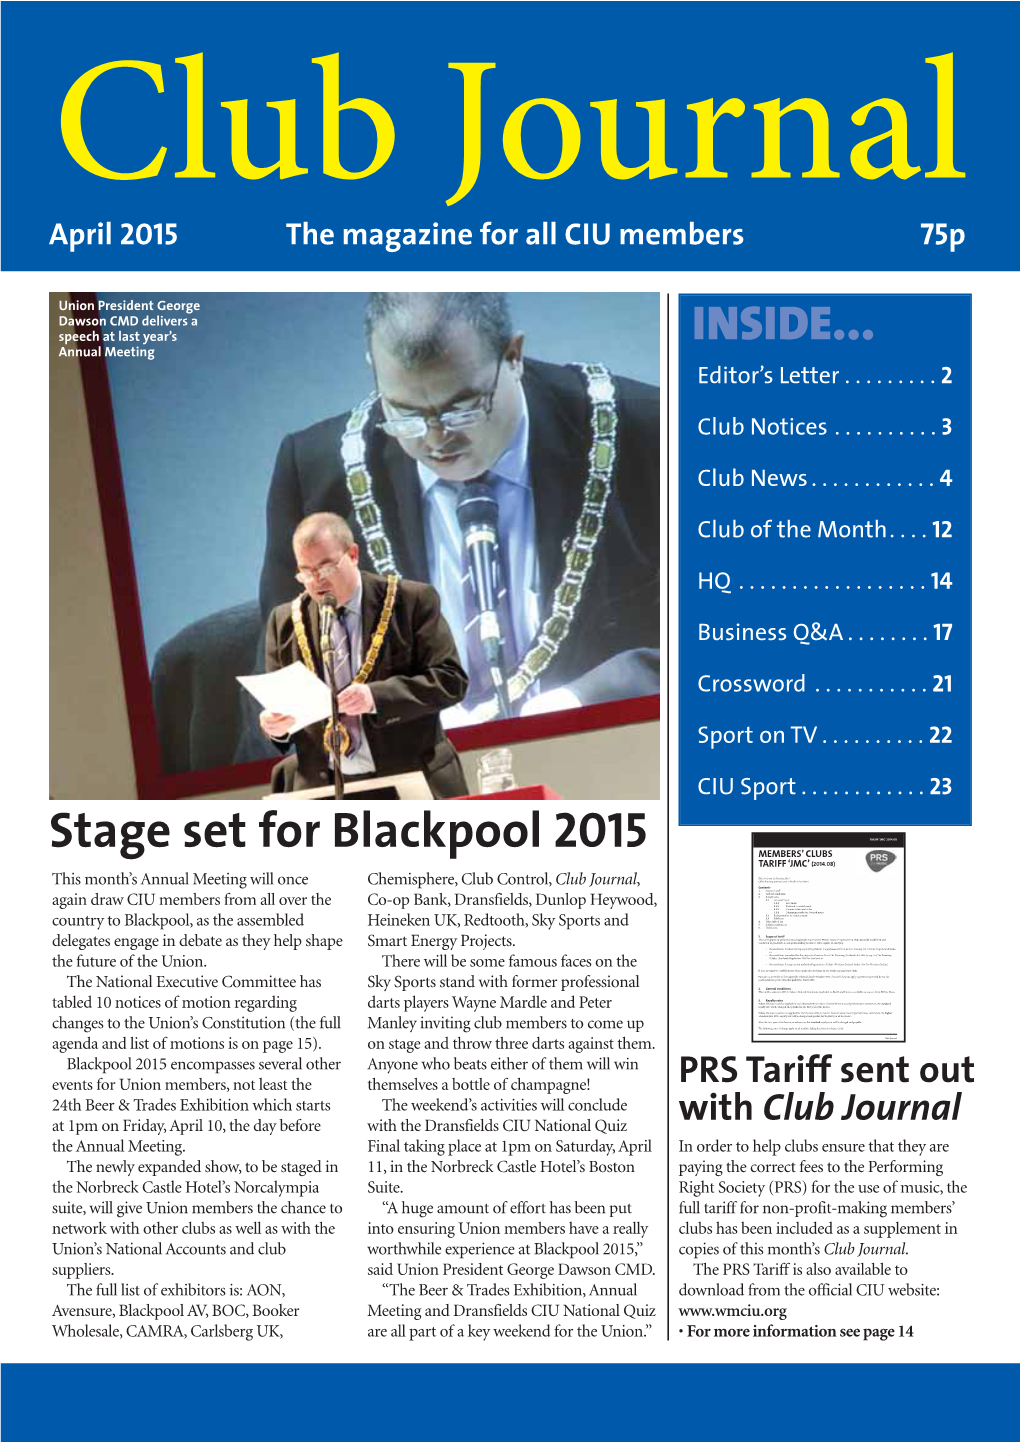 Stage Set for Blackpool 2015